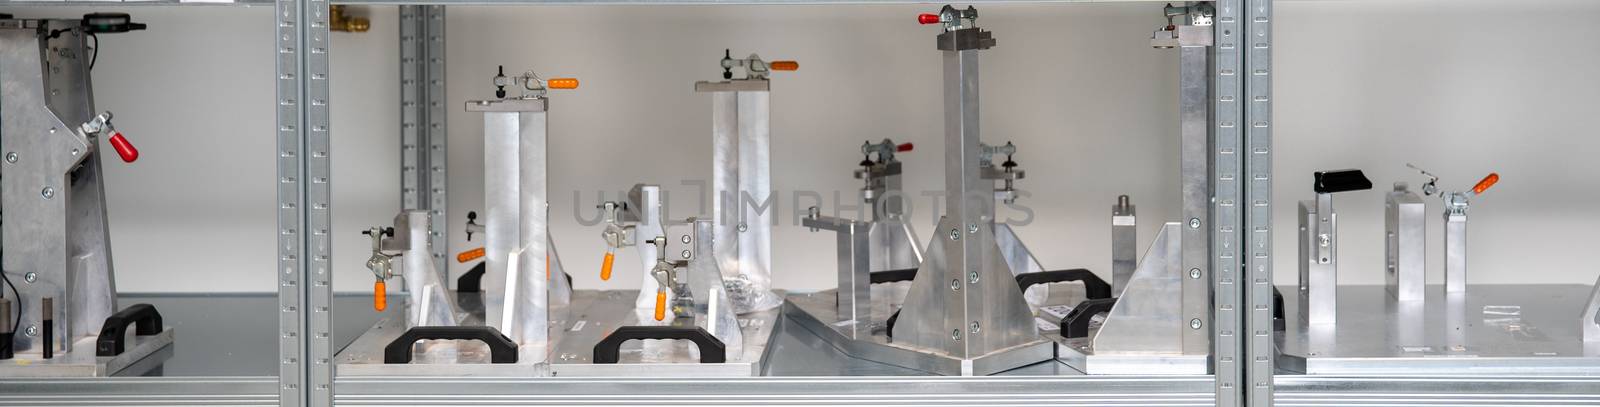 rack with tools for precise 3D measurement of plastic products for the automotive industry by Edophoto